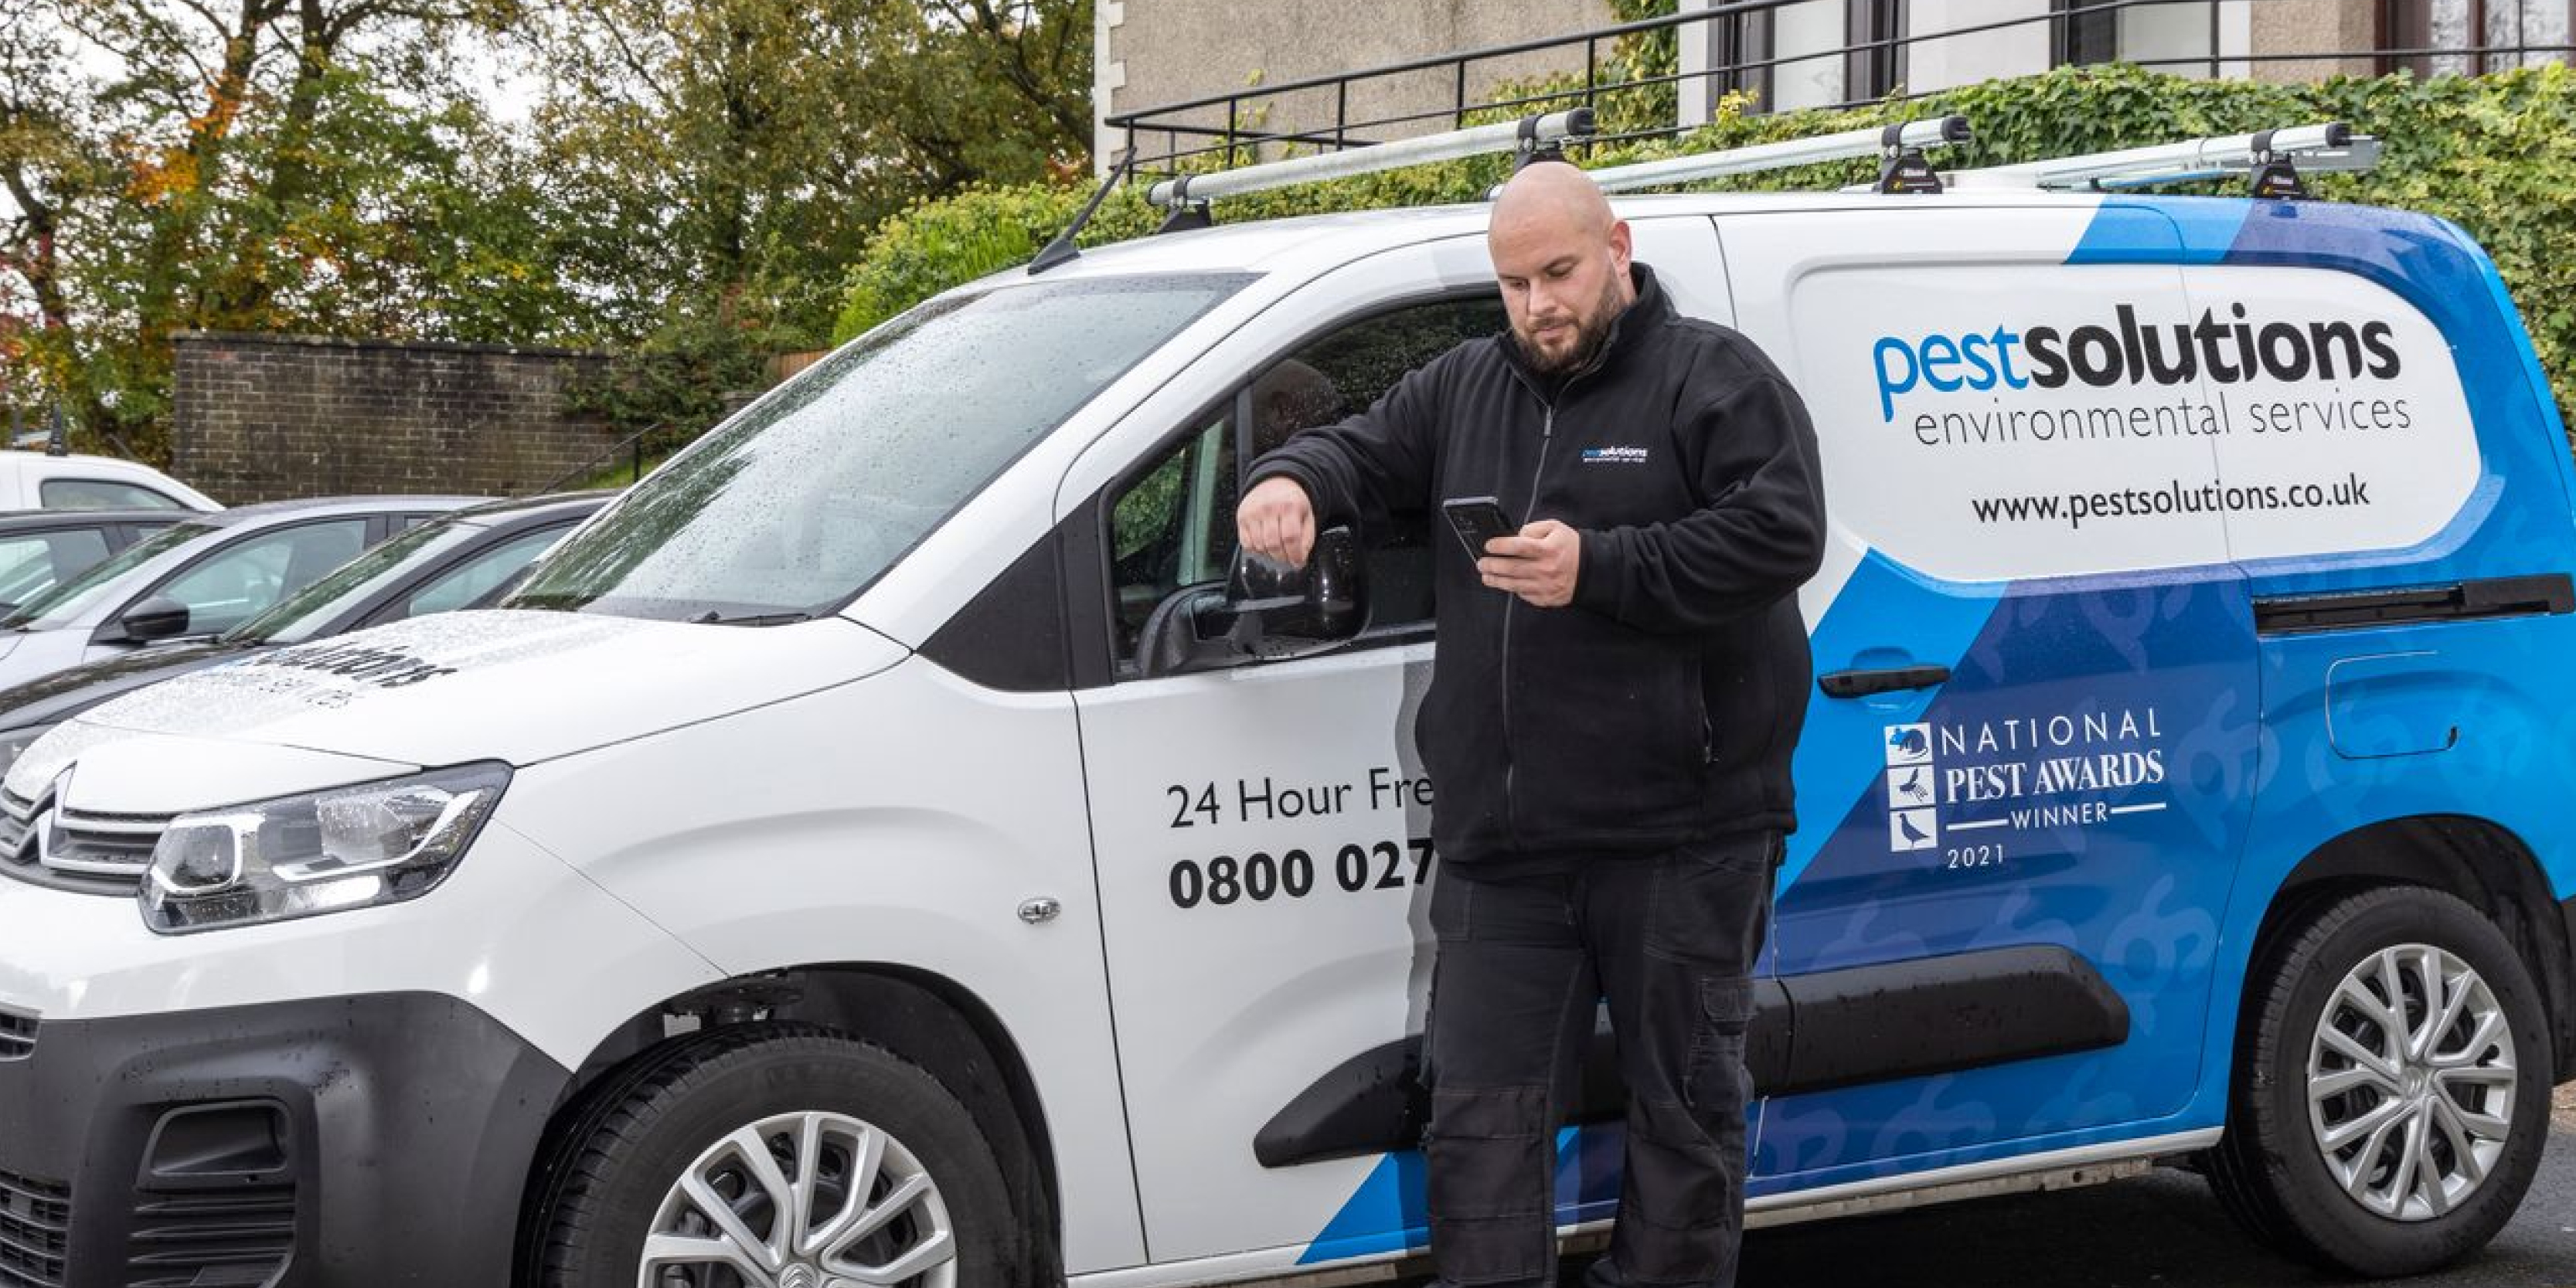 Call Pest Solutions Rowley|Rowley Area Pest Solutions|Rowley Branch of Pest Solutions|Rowley Office Pest Solutions|Rowley Pest Solutions Team|Rowley Scotland Pest Solutions|Pest Solutions Rowley Branch|Pest Solutions Rowley|Pest Solutions in Rowley|Pest Solutions Team in Rowley}